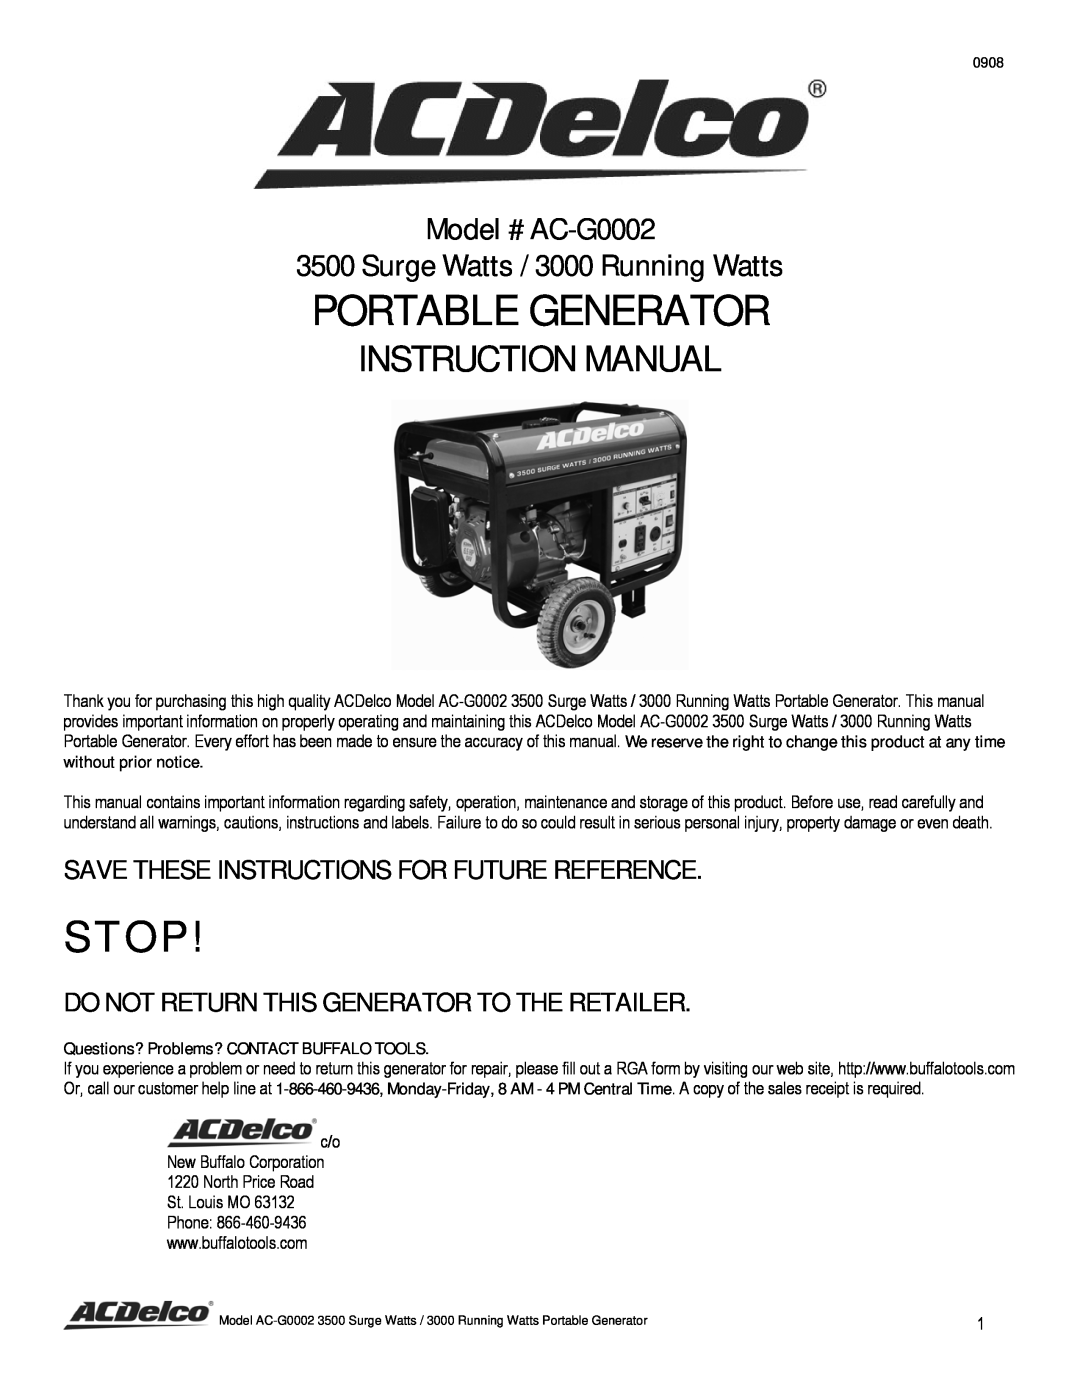 ACDelco AC-G0002 instruction manual Stop, Save These Instructions For Future Reference, Portable Generator 